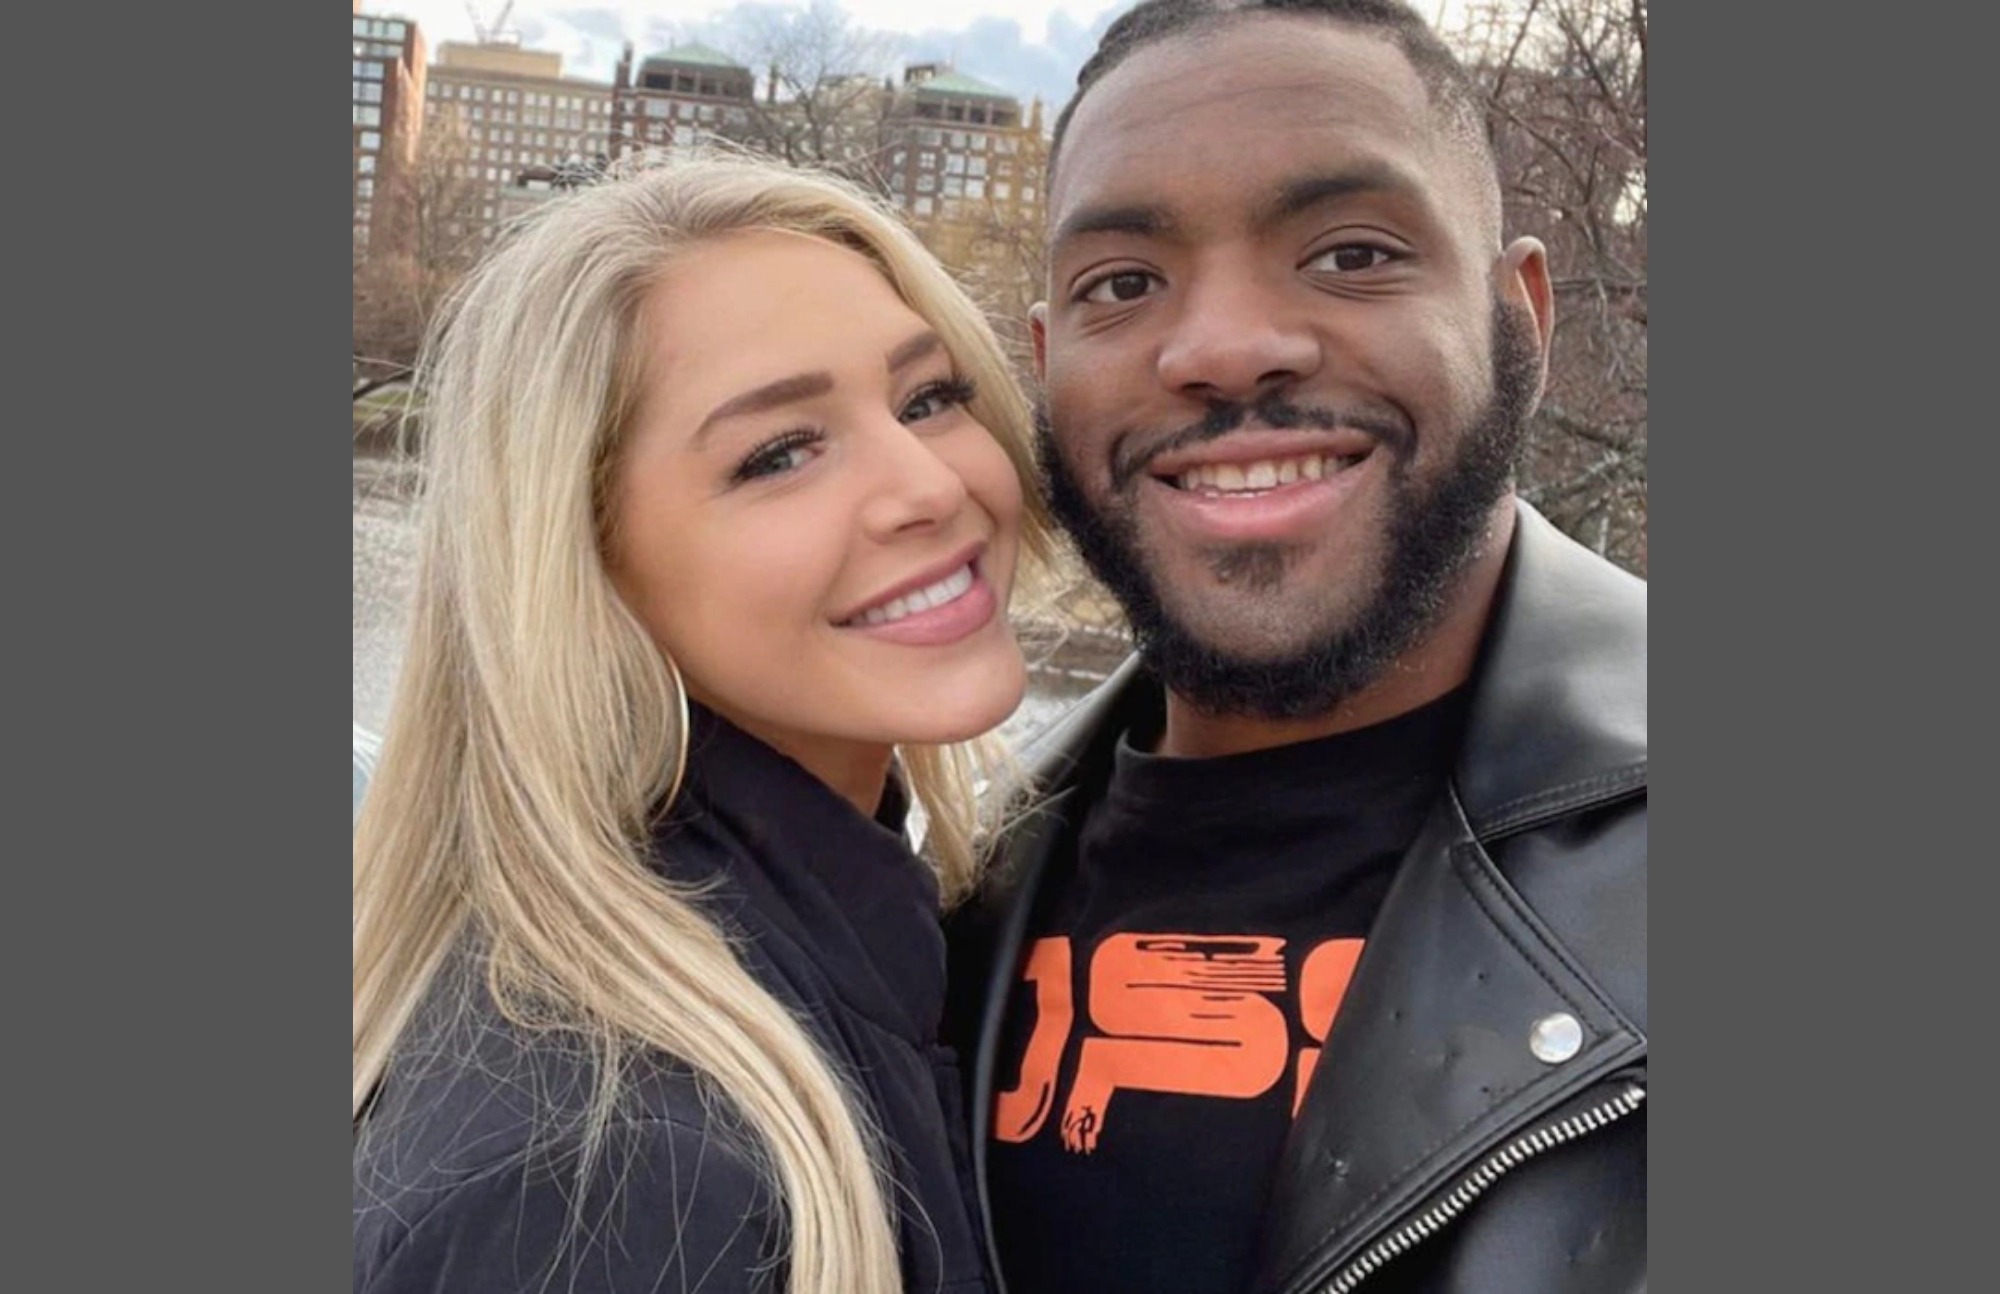 Courtney Tailor with her boyfriend Christian